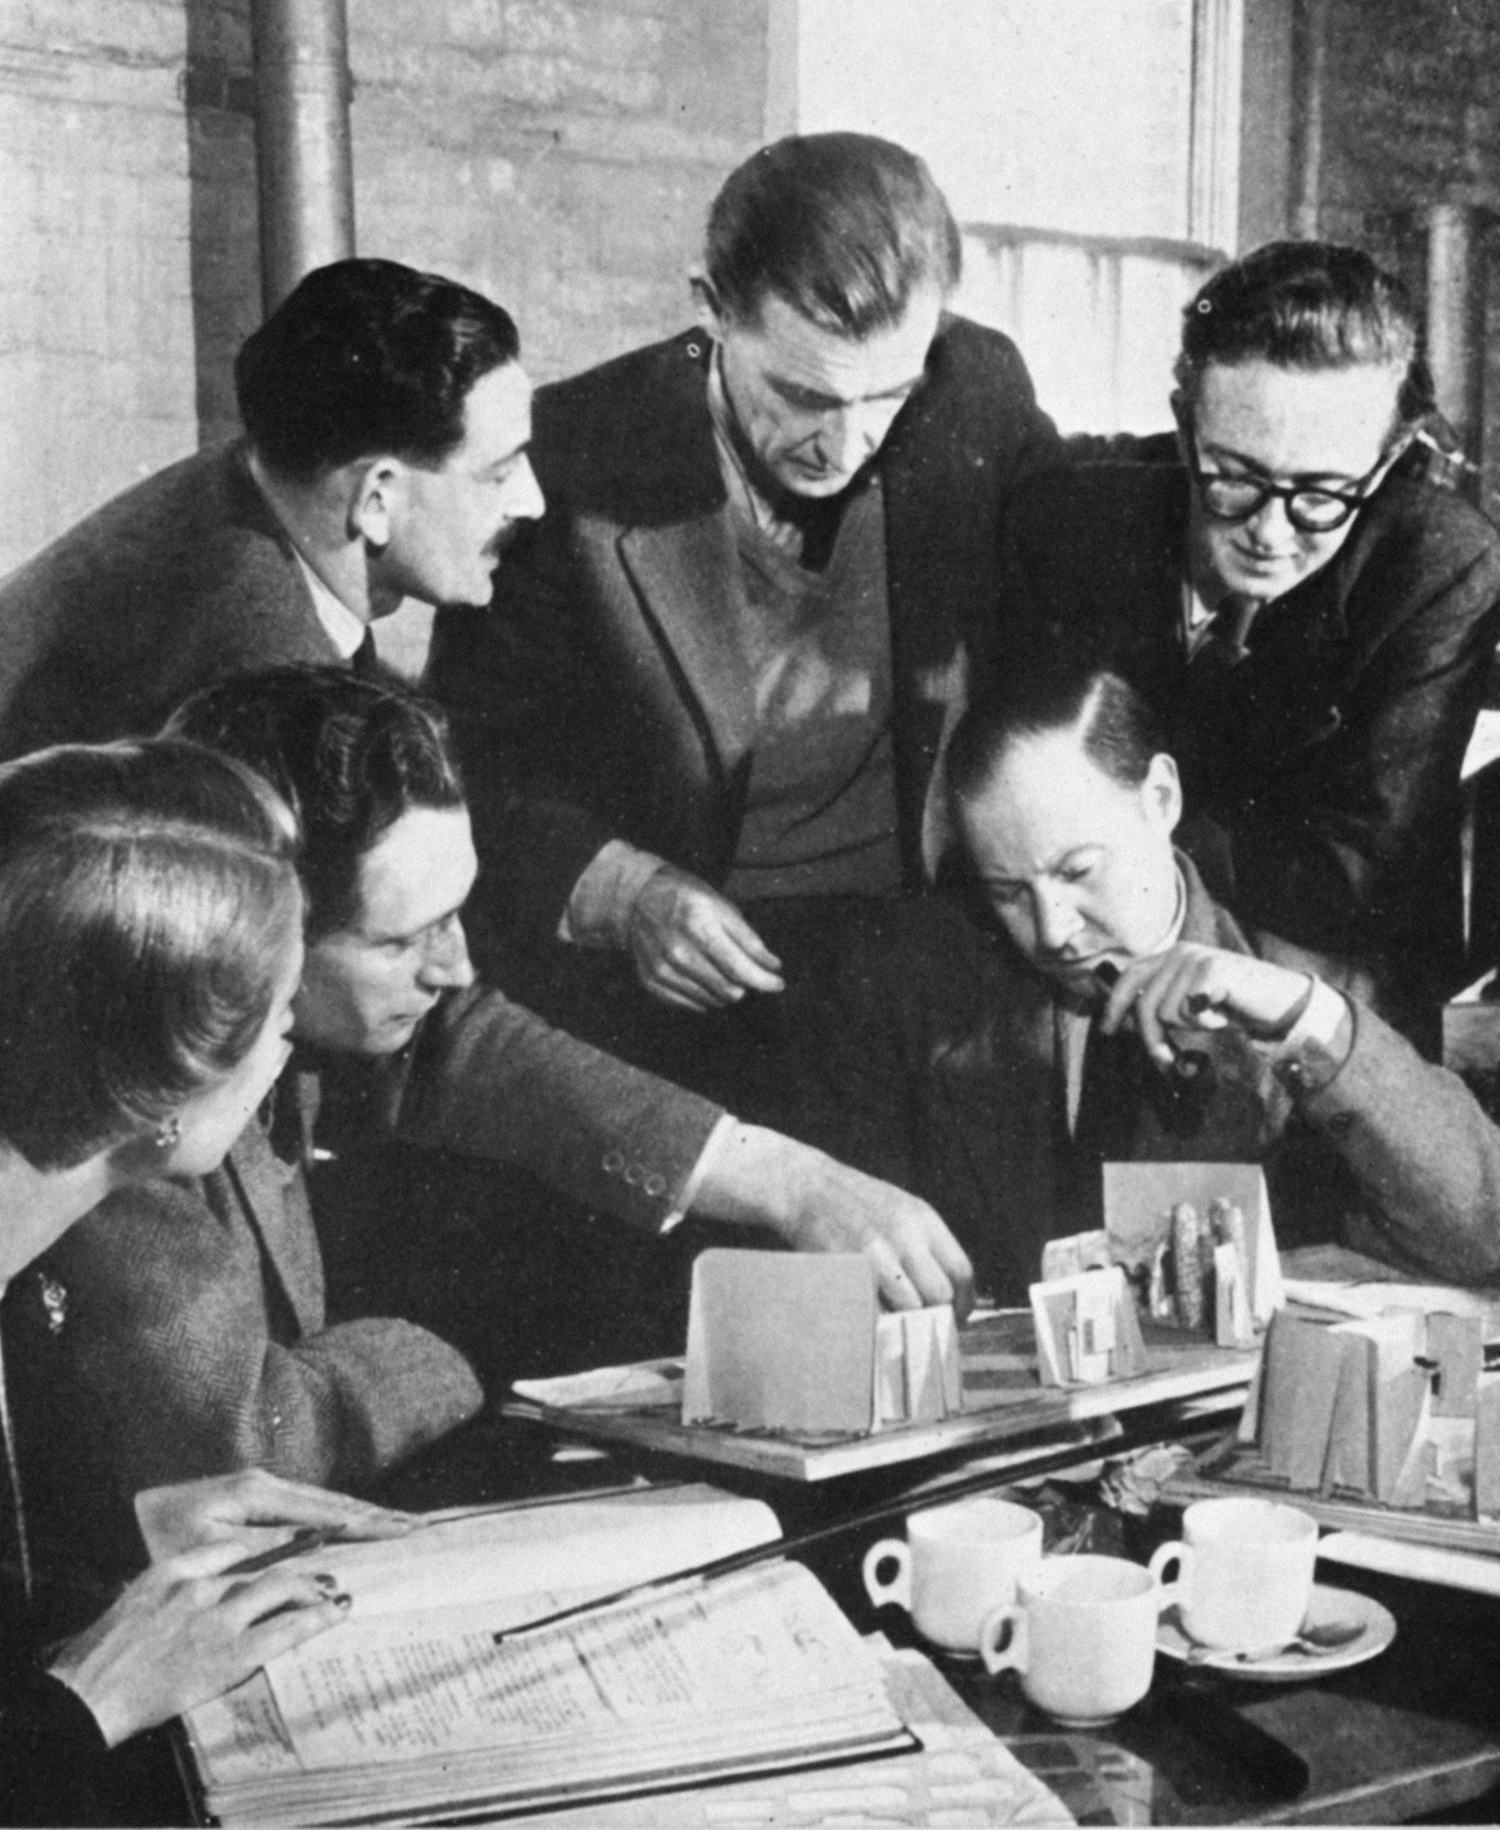 Men point at a model of the studio